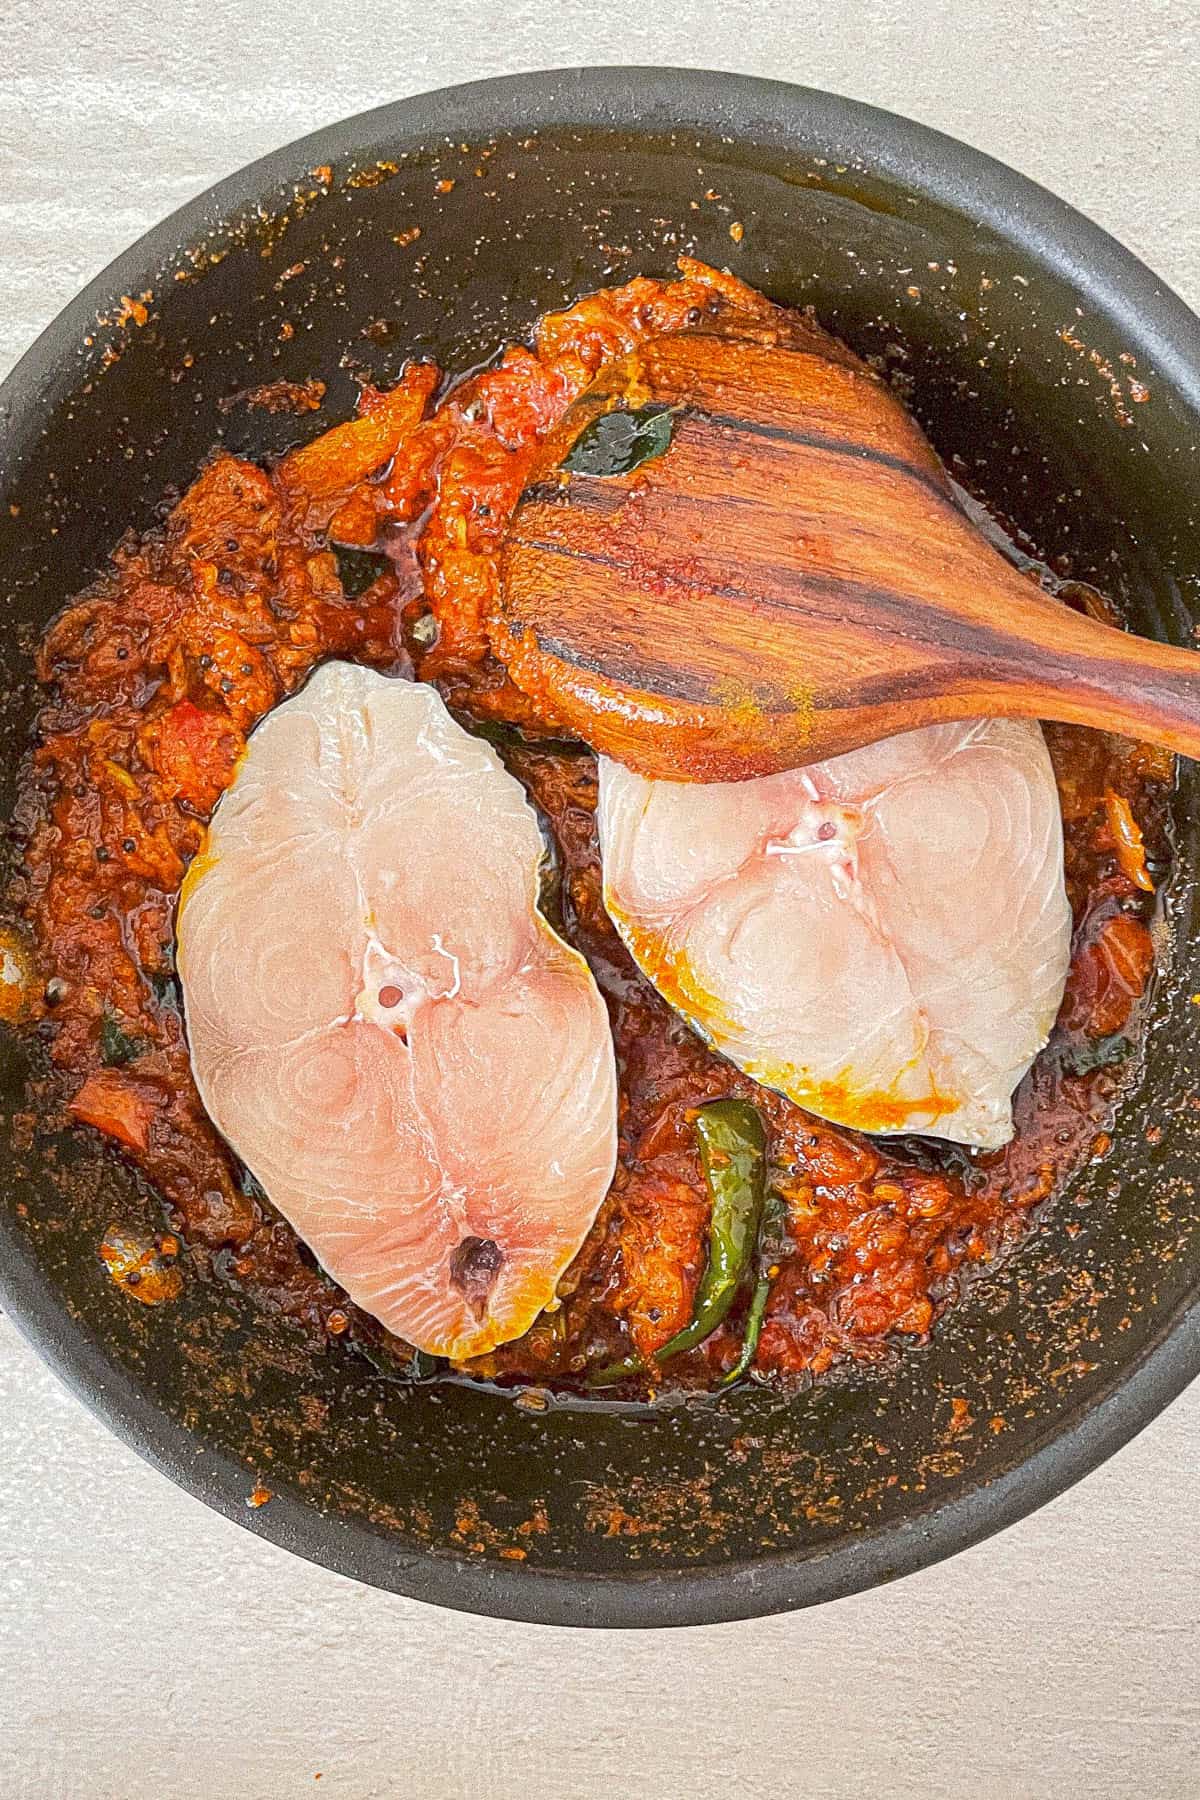 Kerala fish curry cooked in a frying pan.